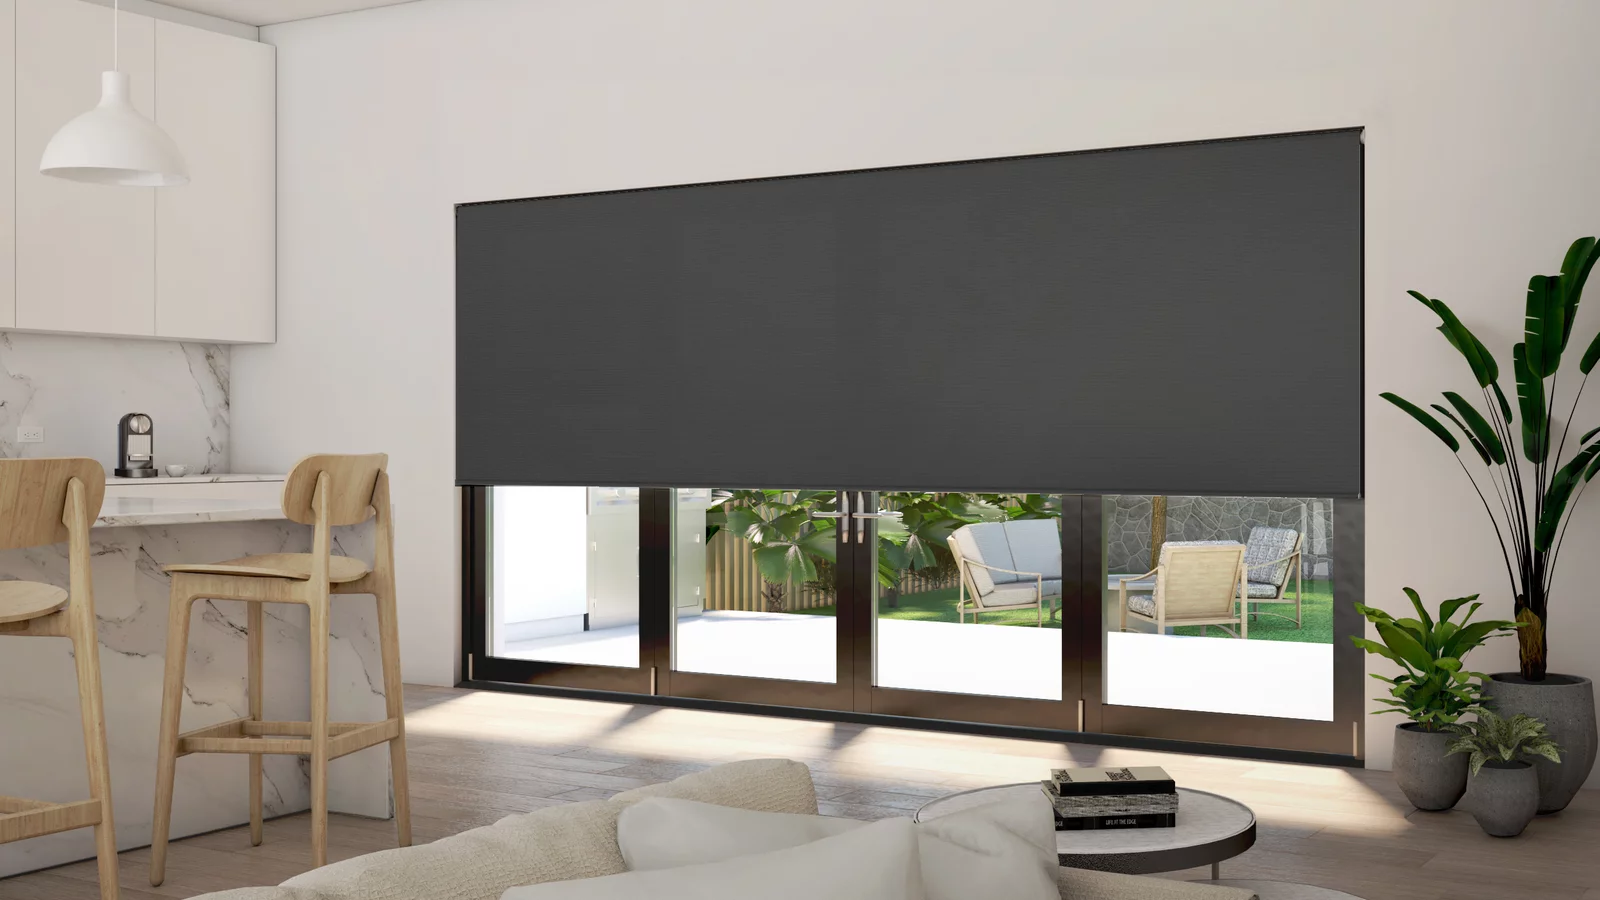 Unicolour Black Extra Wide Electric Roller Blinds | Newblinds.co.uk